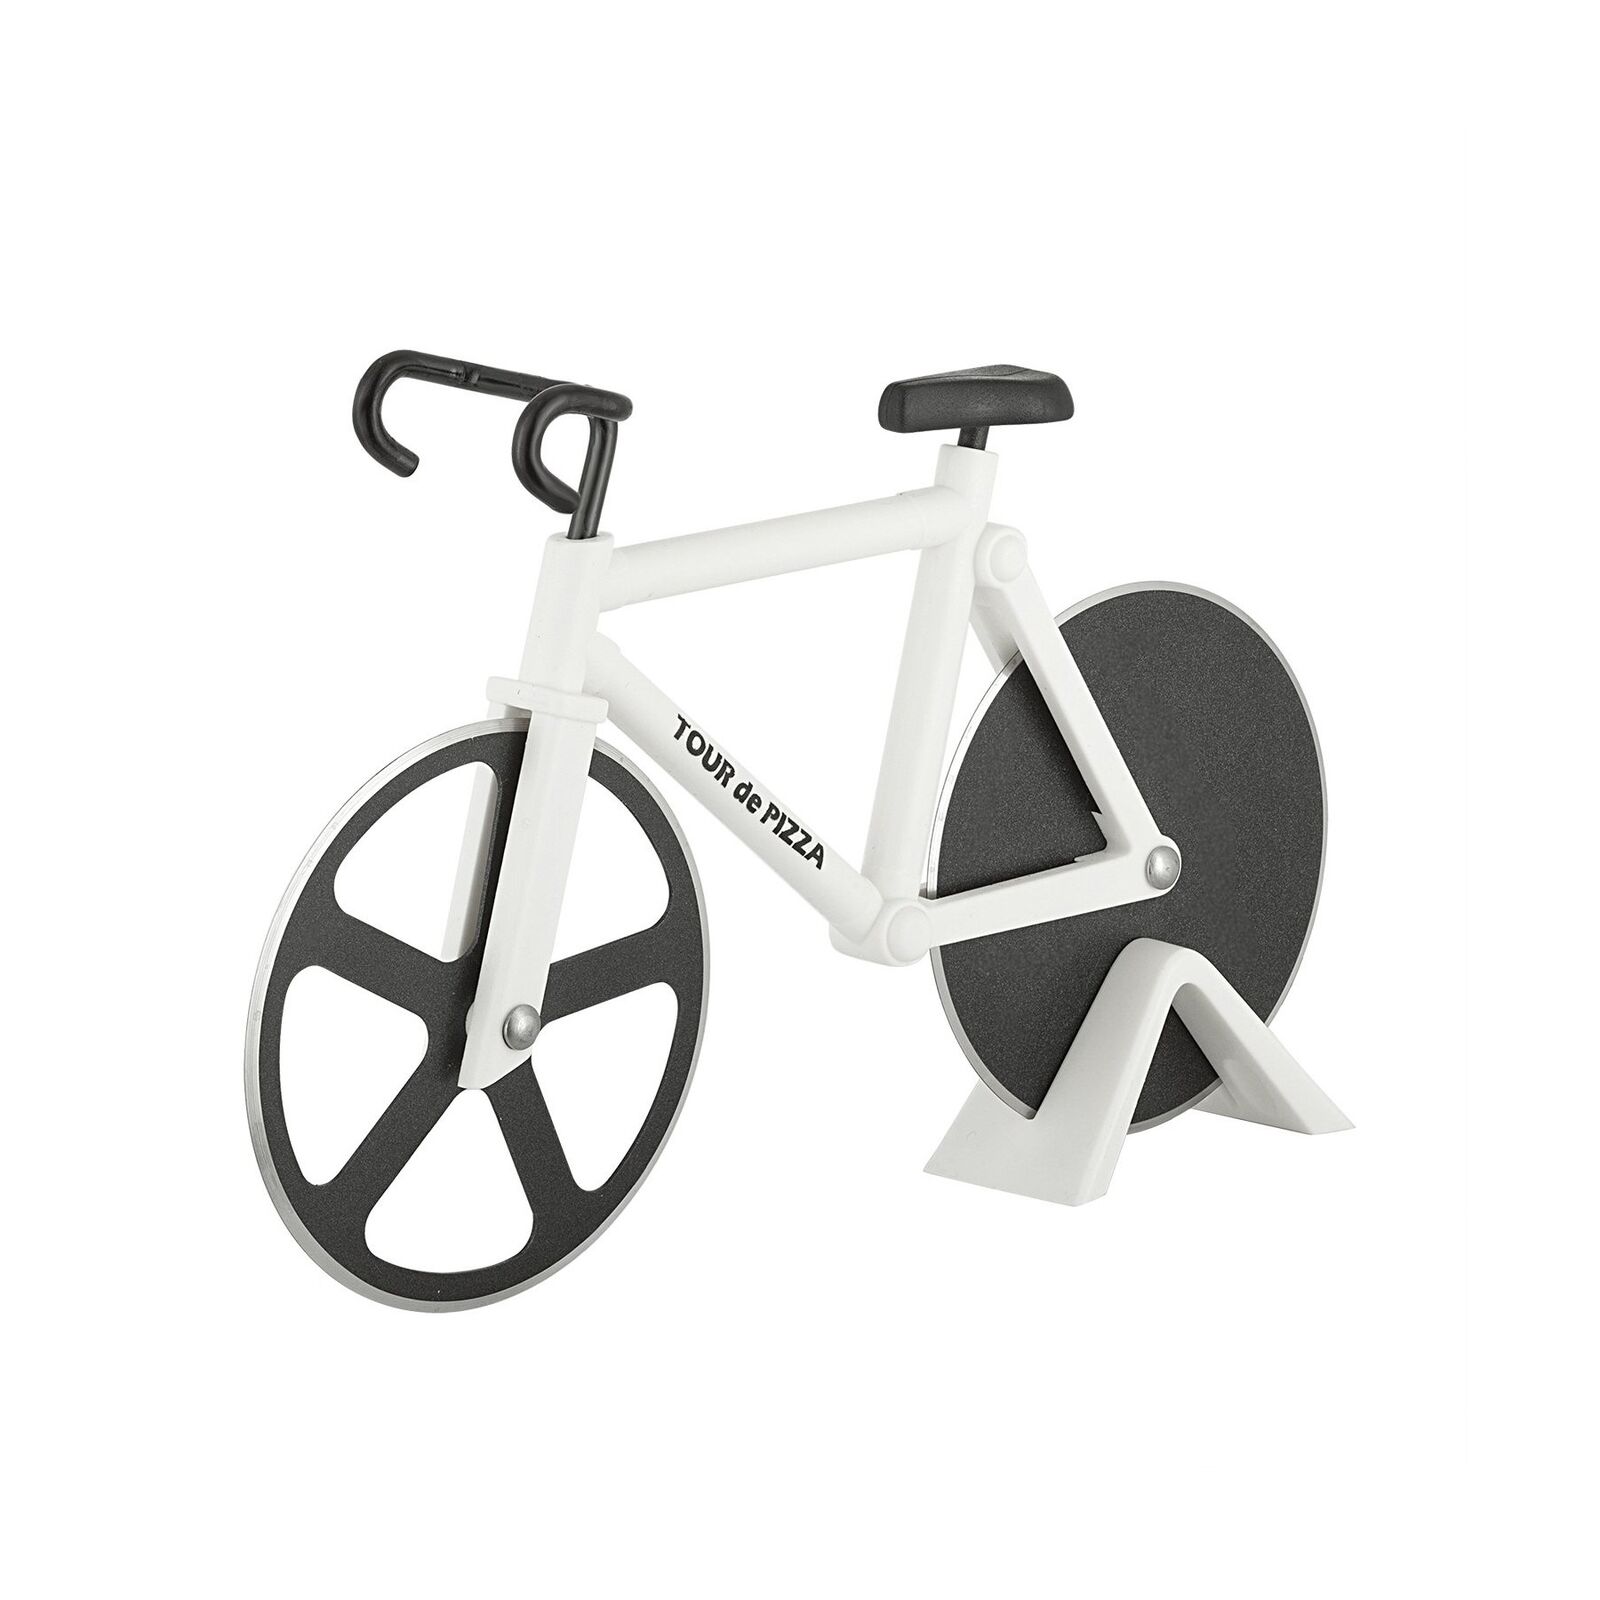 Bicycle Pizza Cutter - TOUR de PIZZA - Dual Stainless Steel Non-Stick Cutting Wheels - Display Stand - The Bike Pizza Cutter is Dishwasher Safe